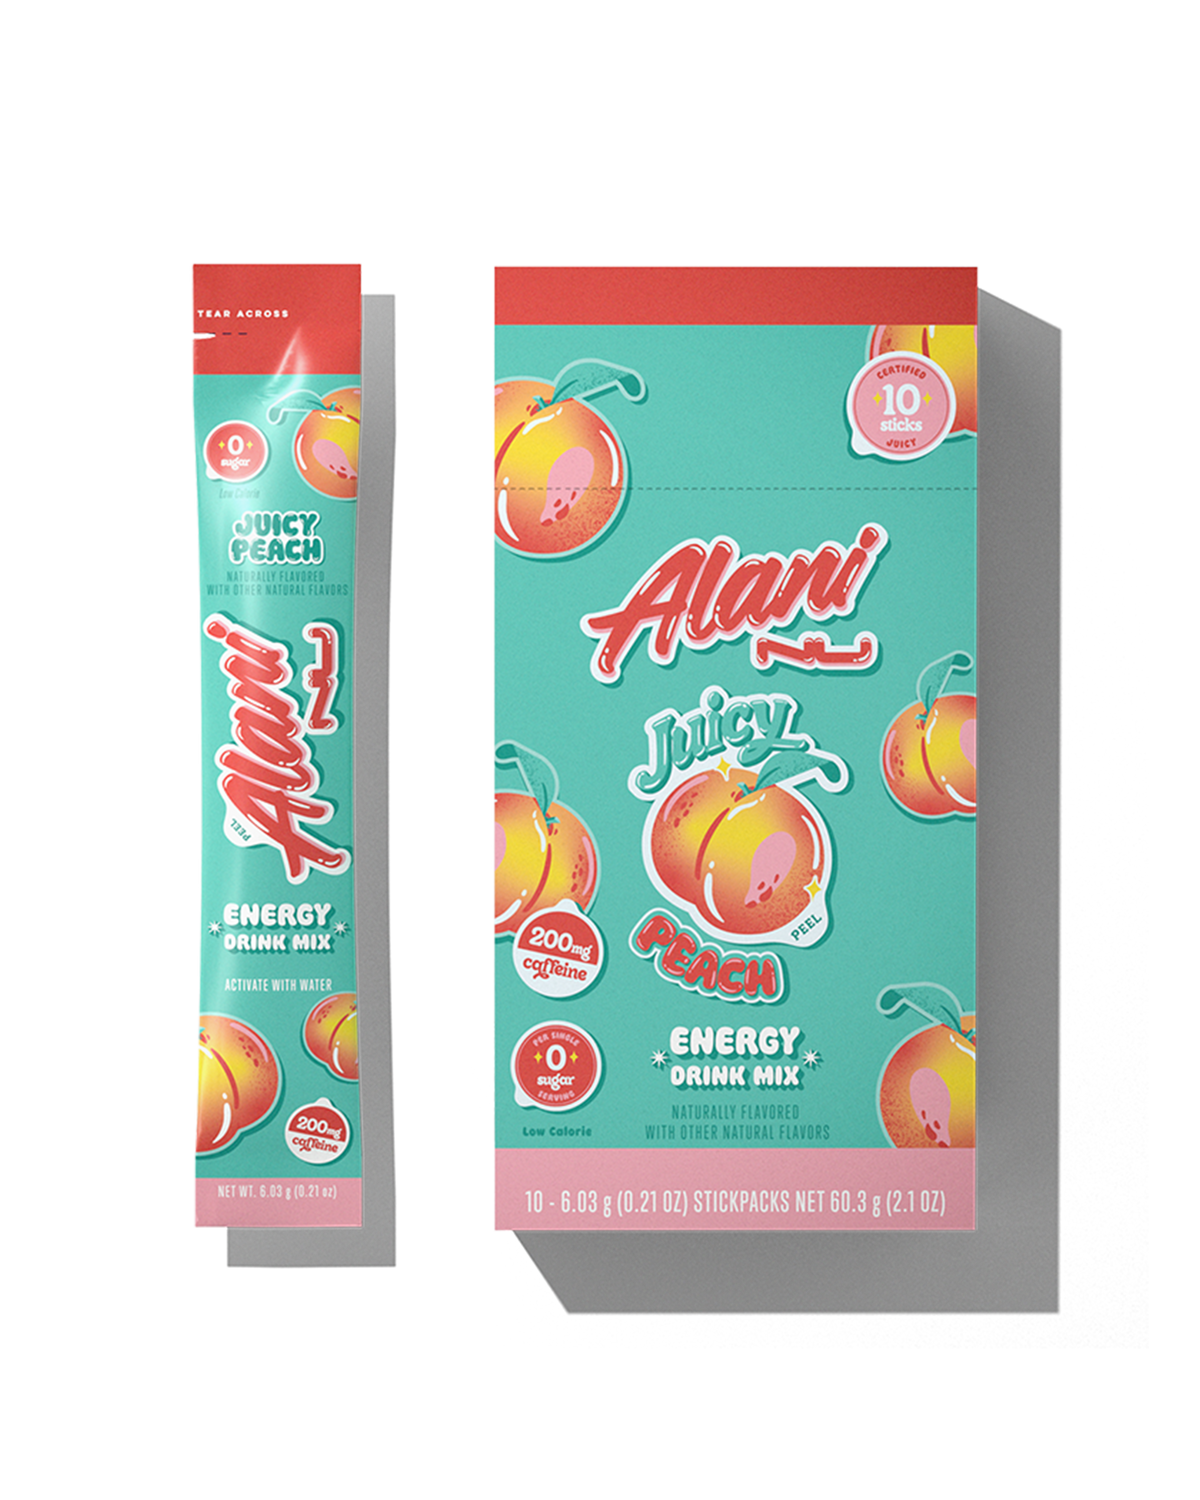 A front 10 pack Energy Stick in Juicy Peach.